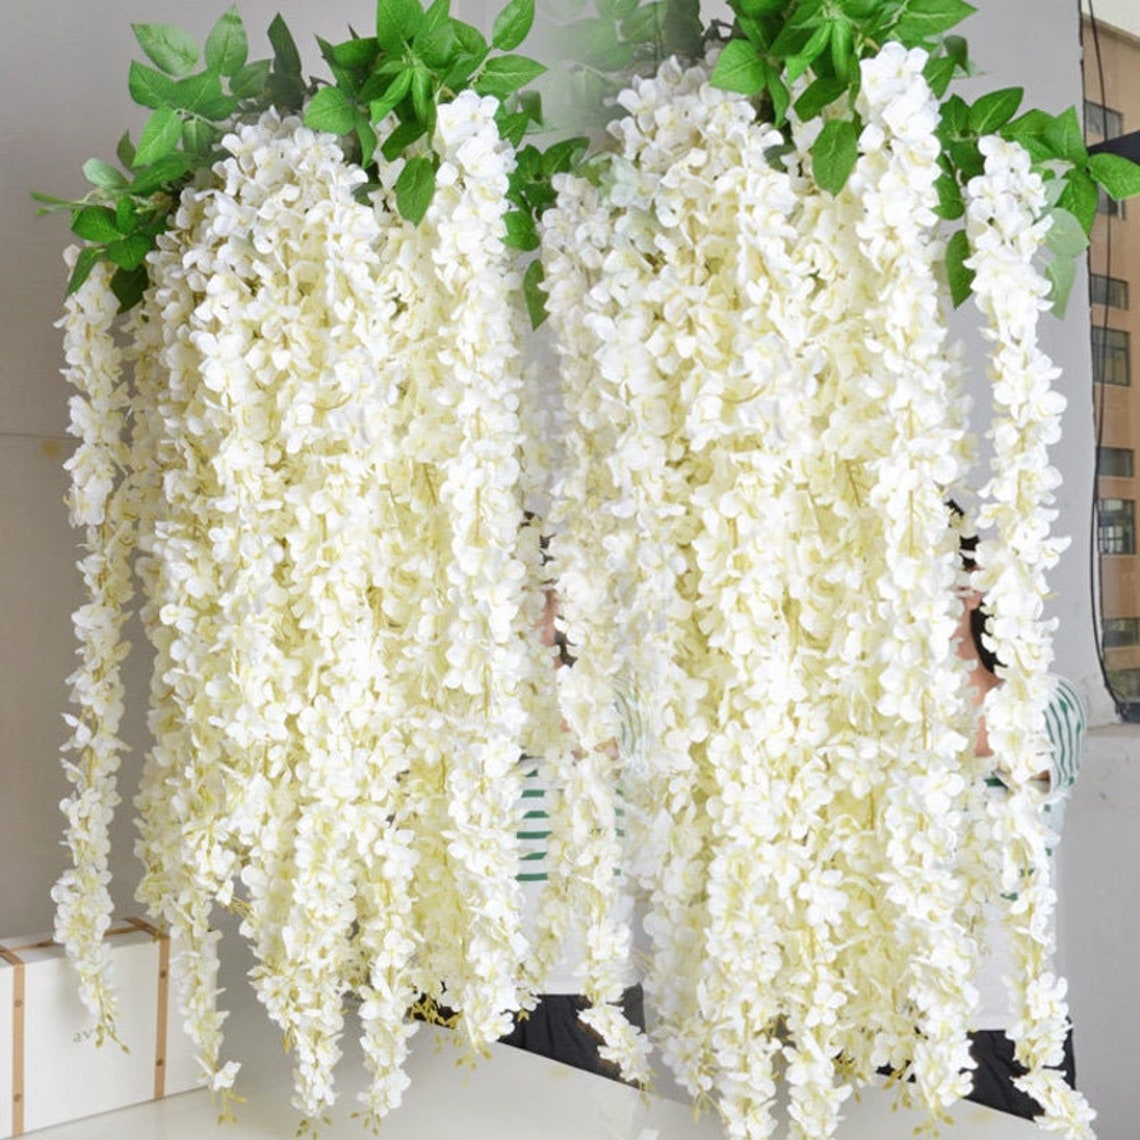 White Wisteria Hanging Flowers Vine for Wedding Arch